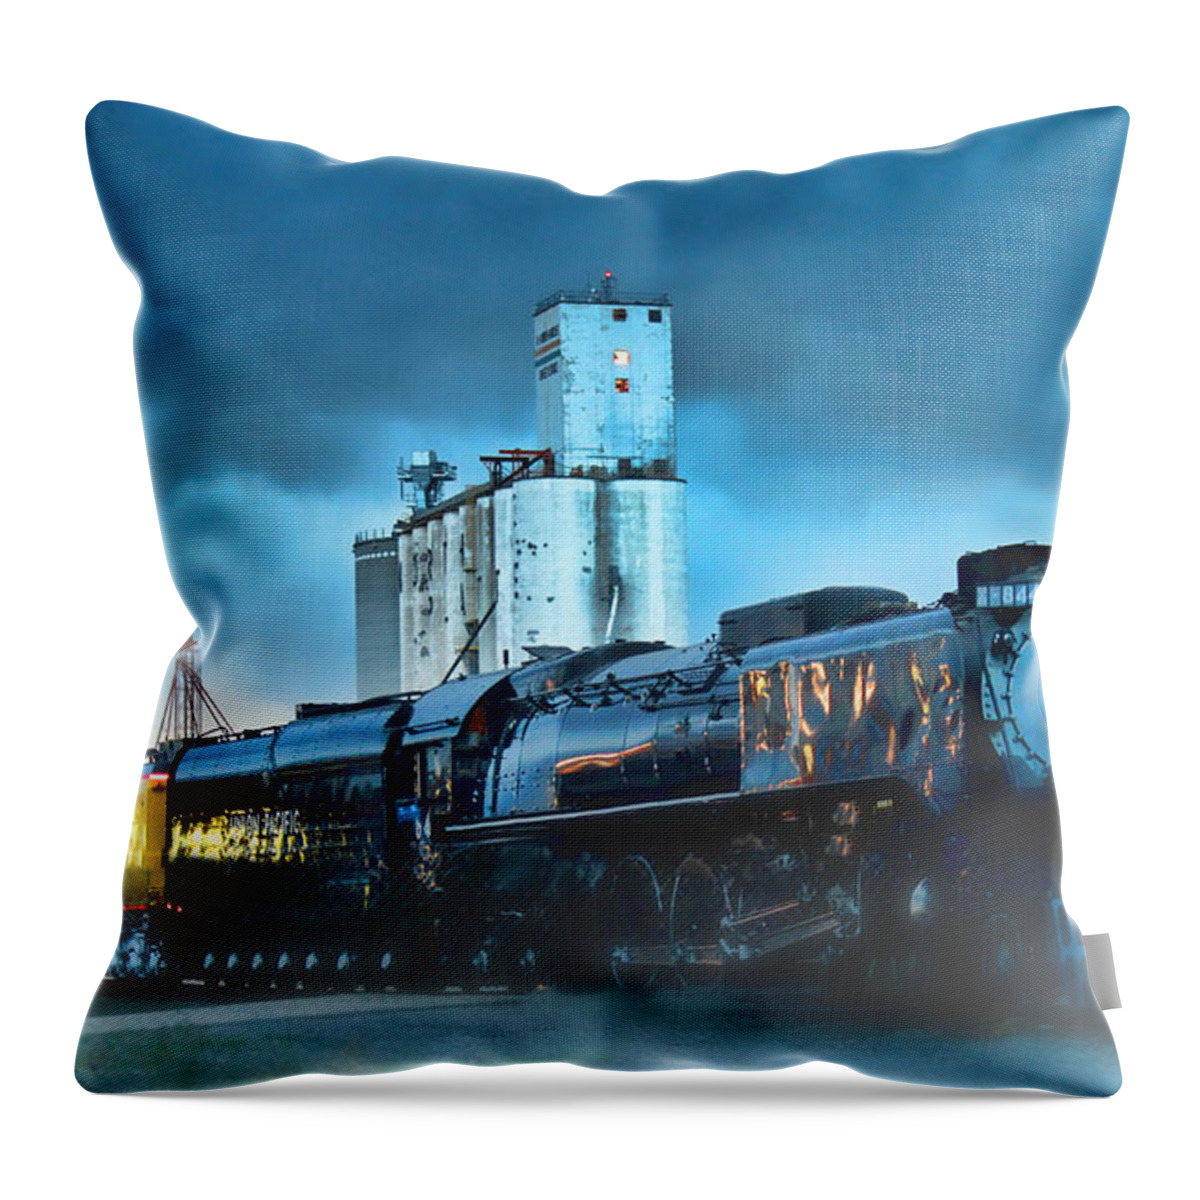 844 Throw Pillow featuring the photograph 844 Night Train by Sylvia Thornton